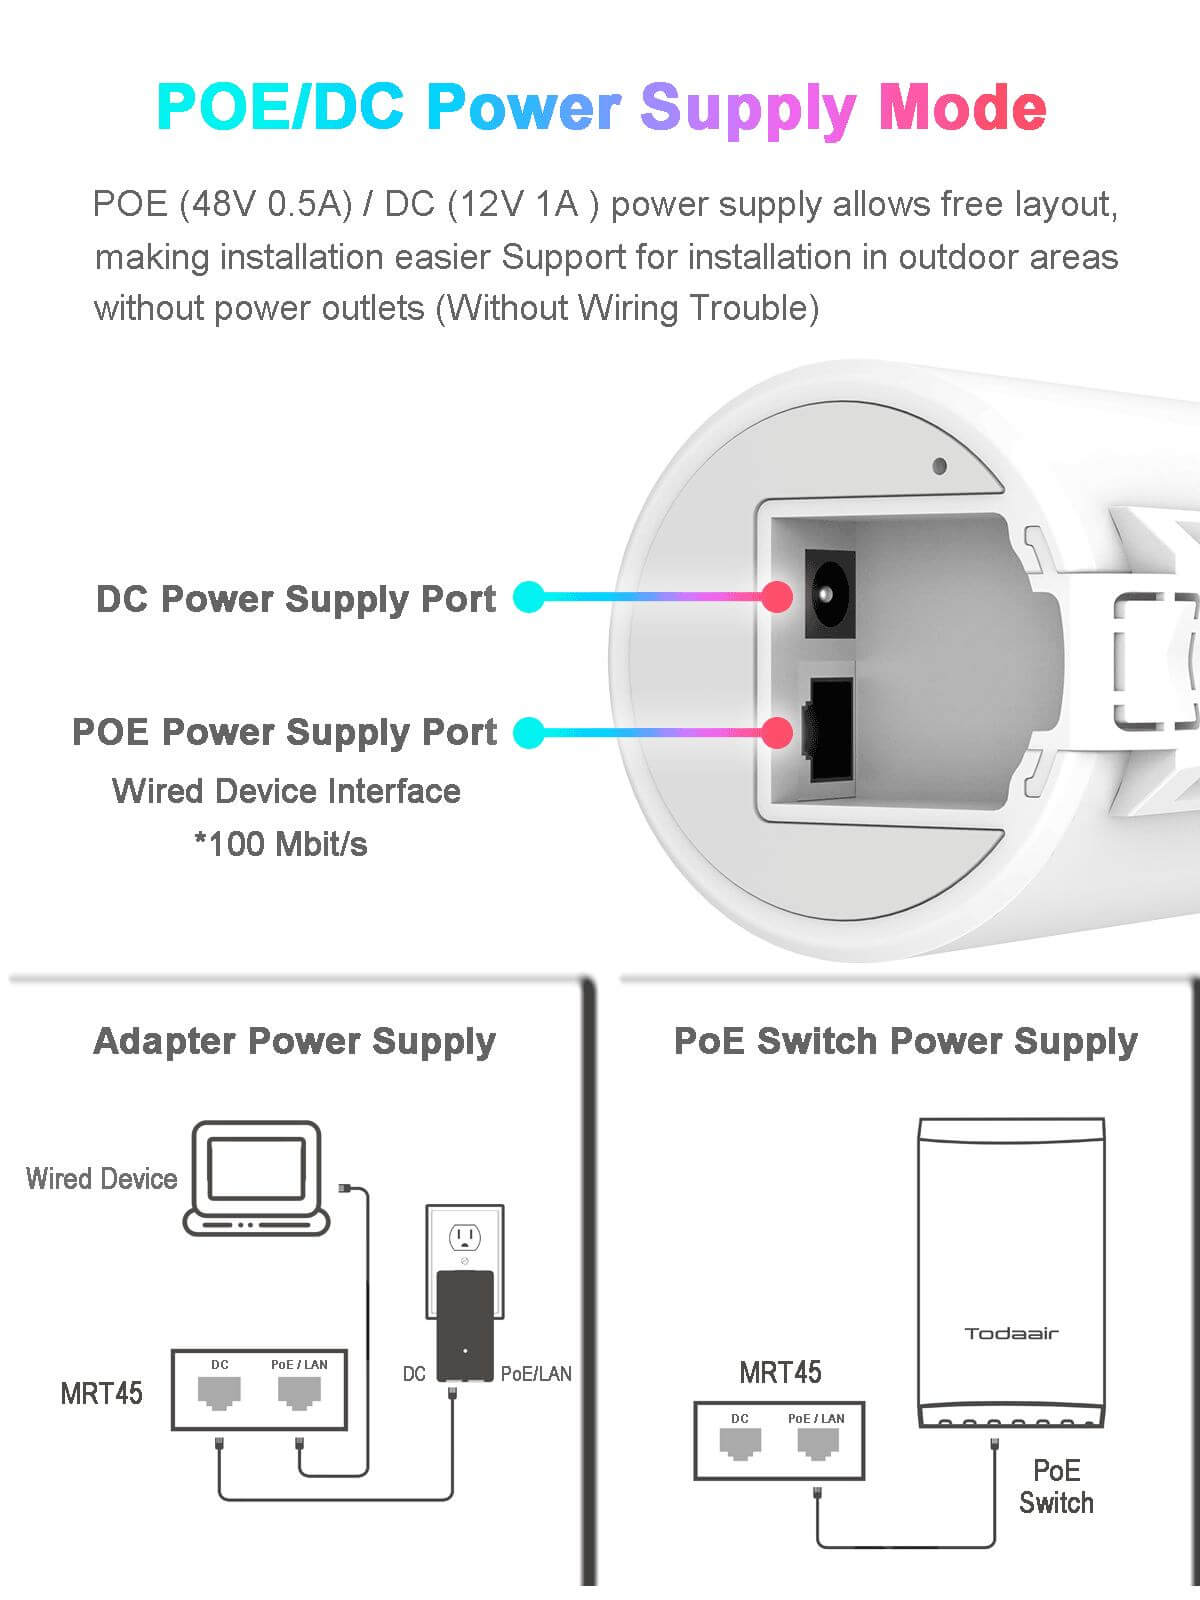 poe and dc power supply